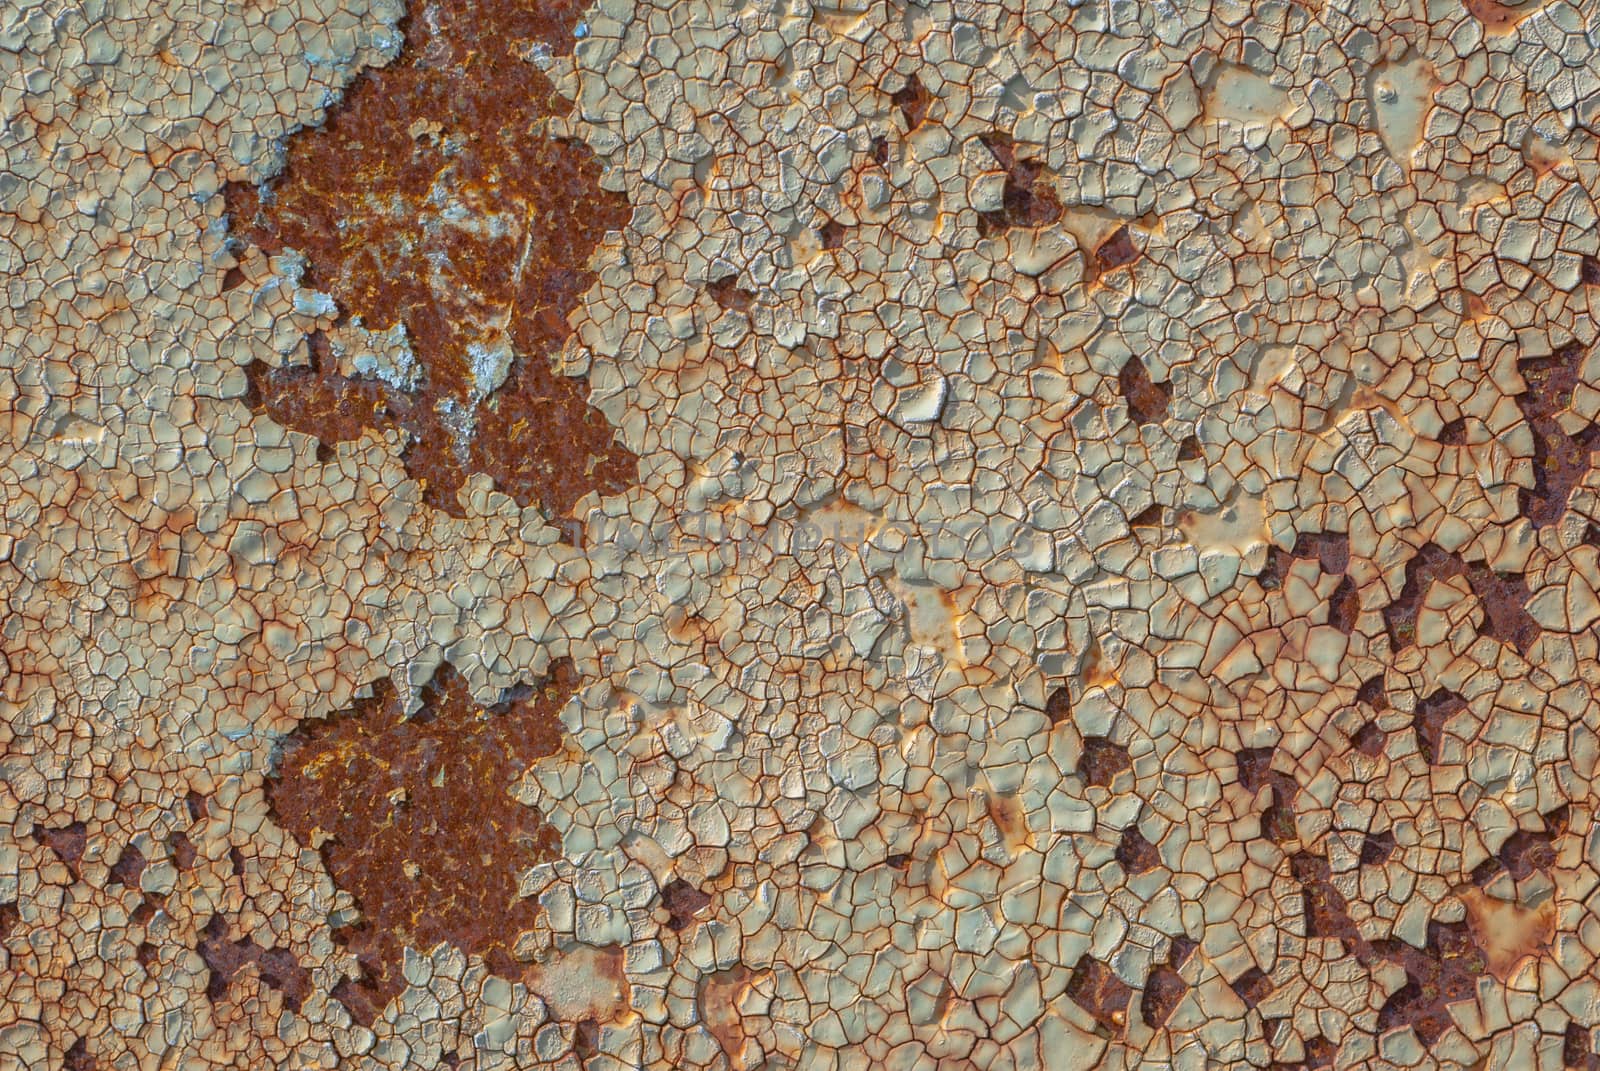 surface of rusty iron with remnants of old paint, great background or texture for your project by uvisni